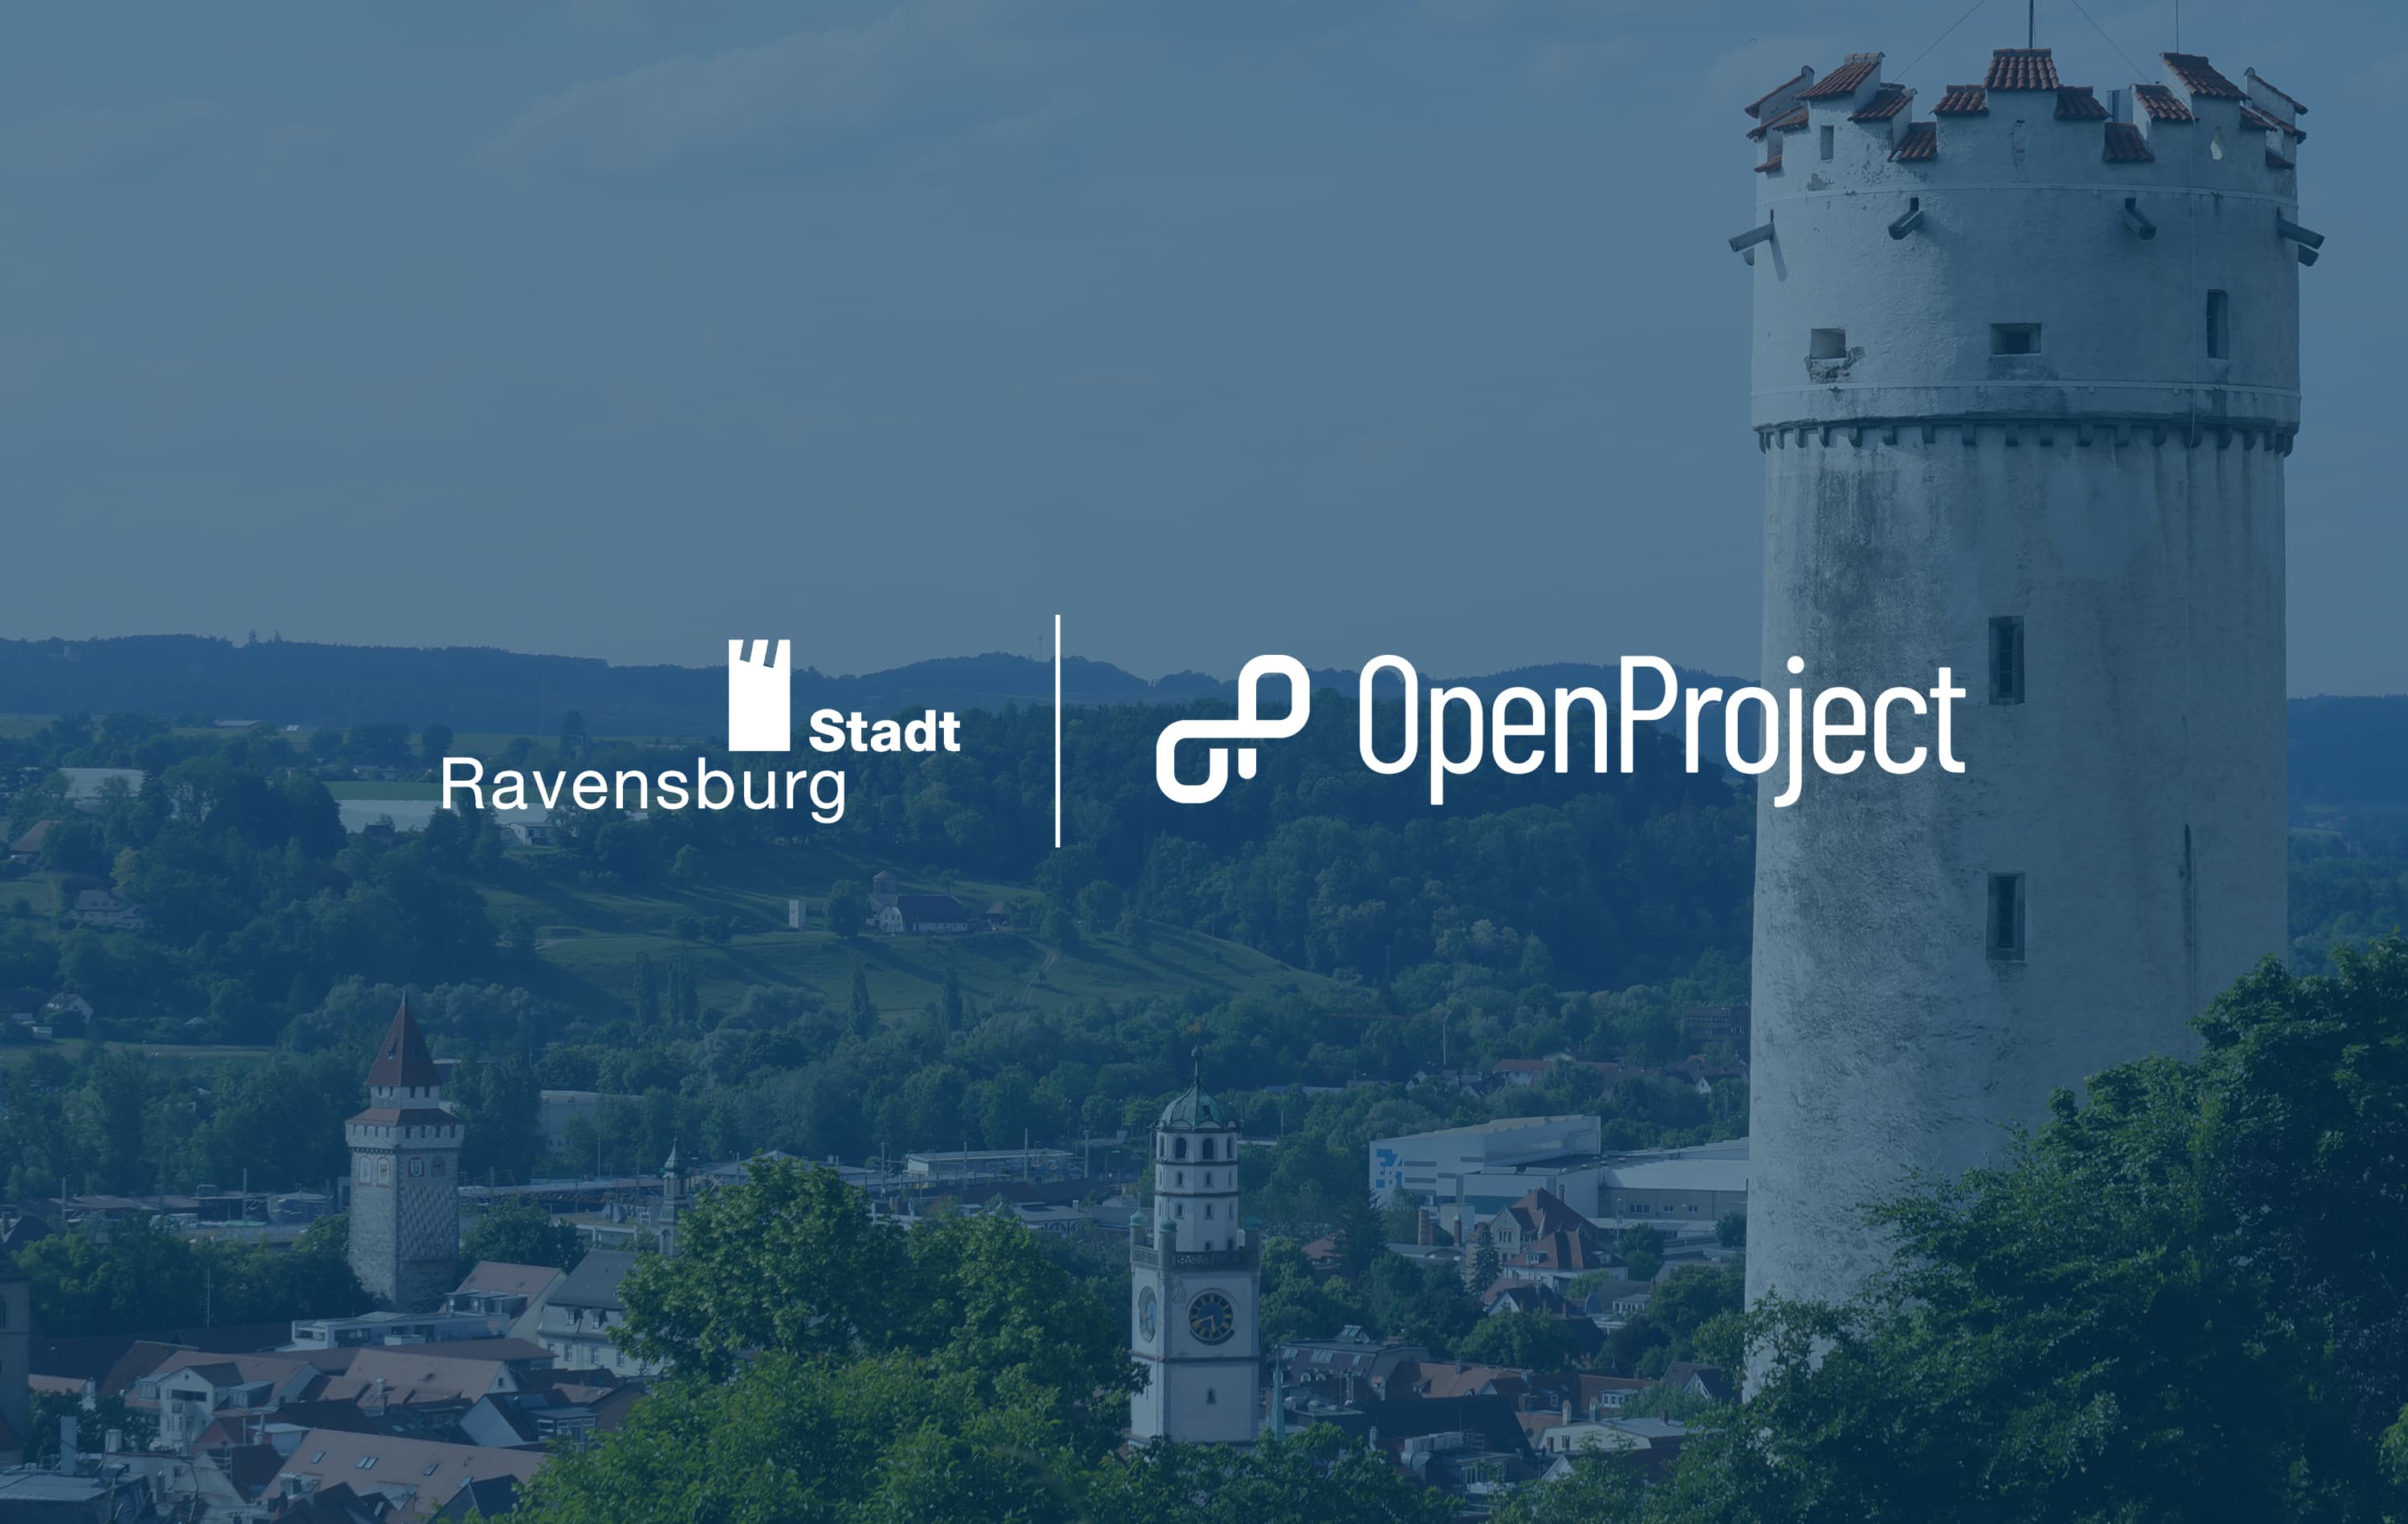 City of Ravensburg uses OpenProject